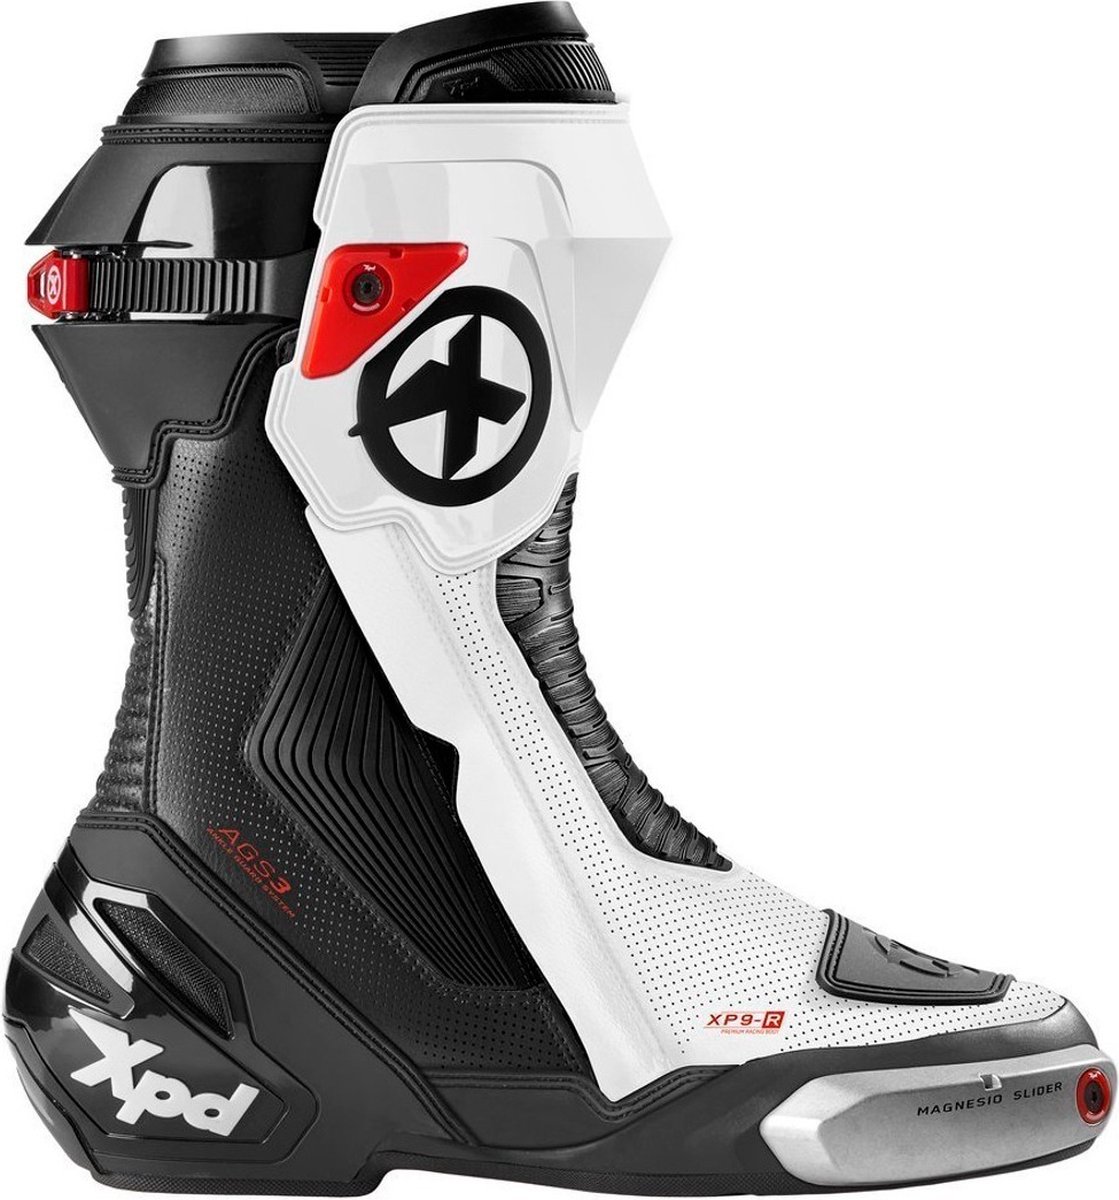 XPD XP-9 R BLACK WHITE BOOTS 39 - Maat - Laars